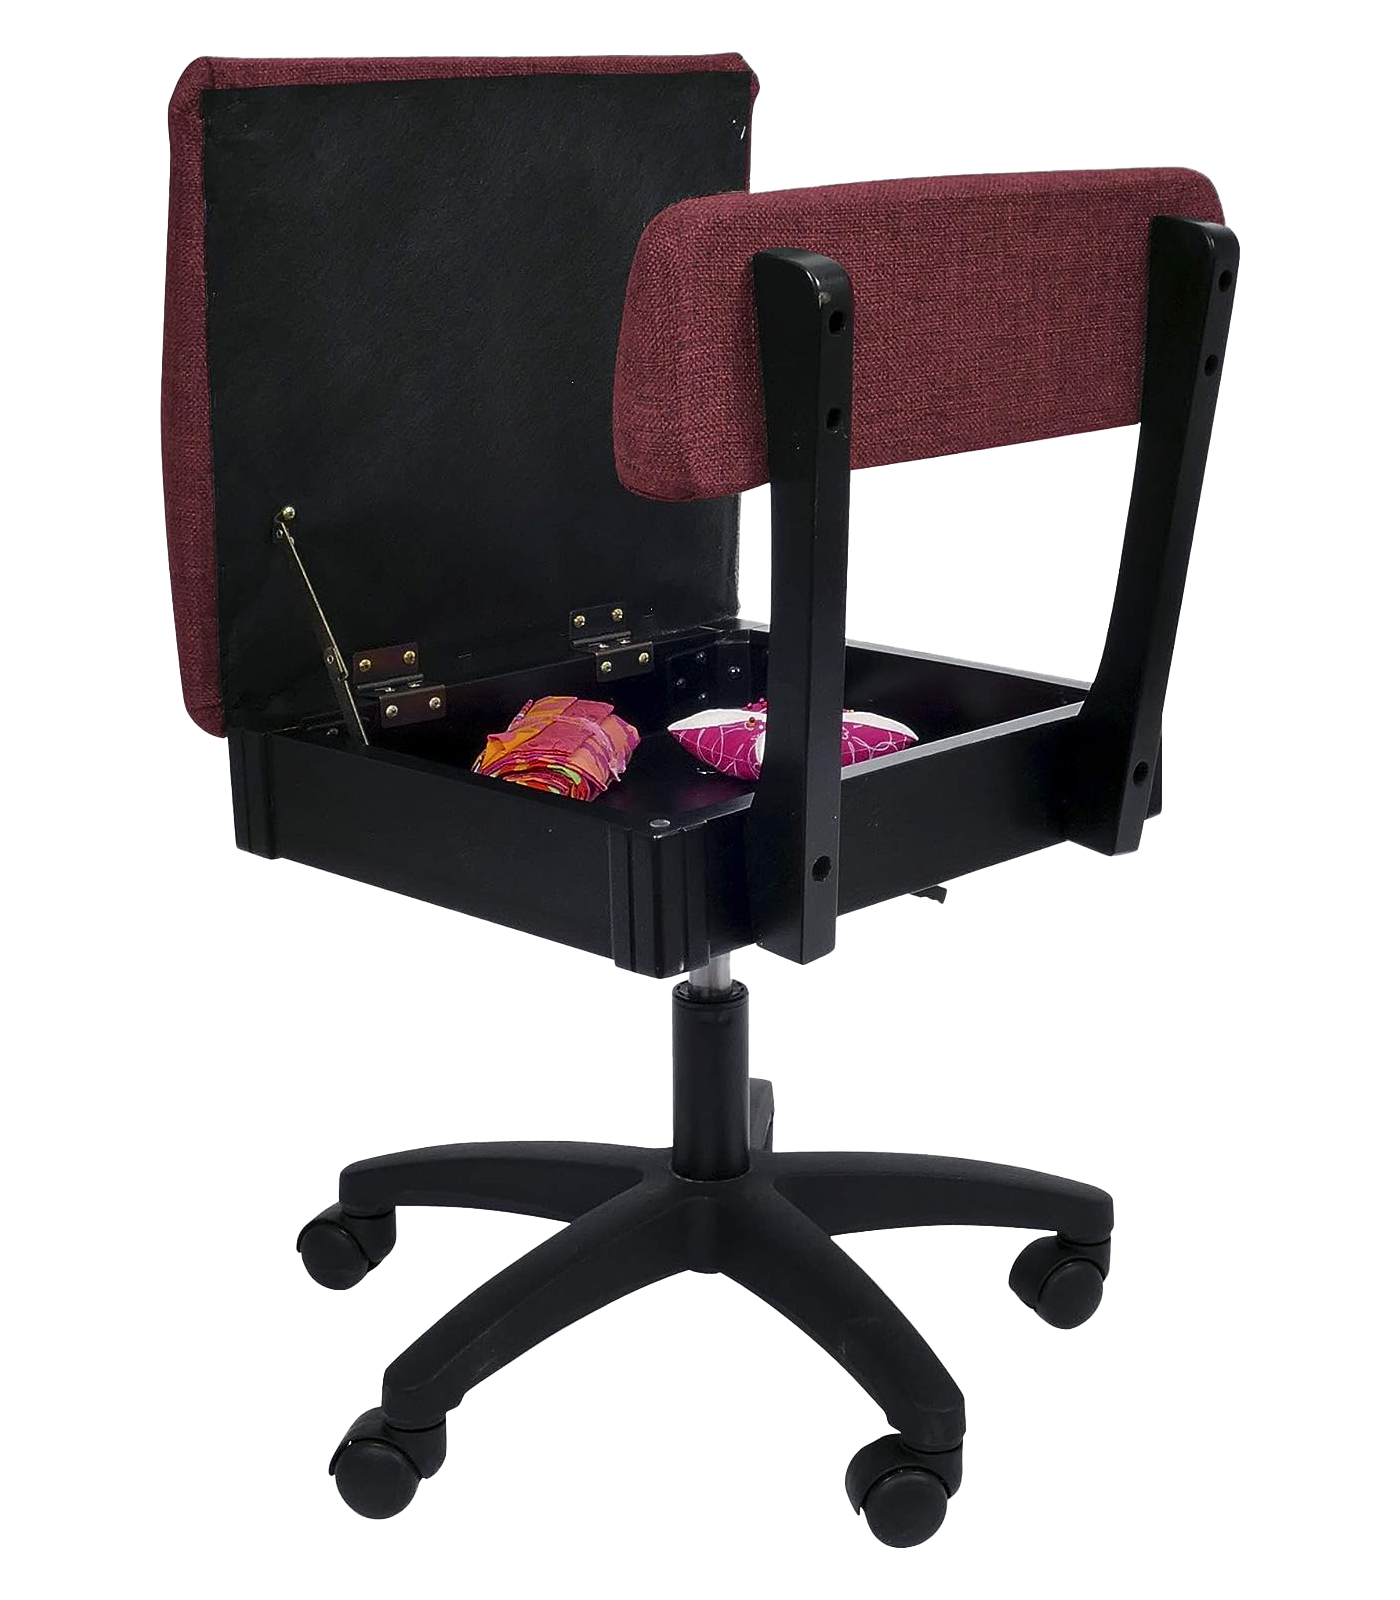 Arrow Sewing Height Adjustable Hydraulic Sewing Chair H8150 Crown Ruby for Sale at World Weidner